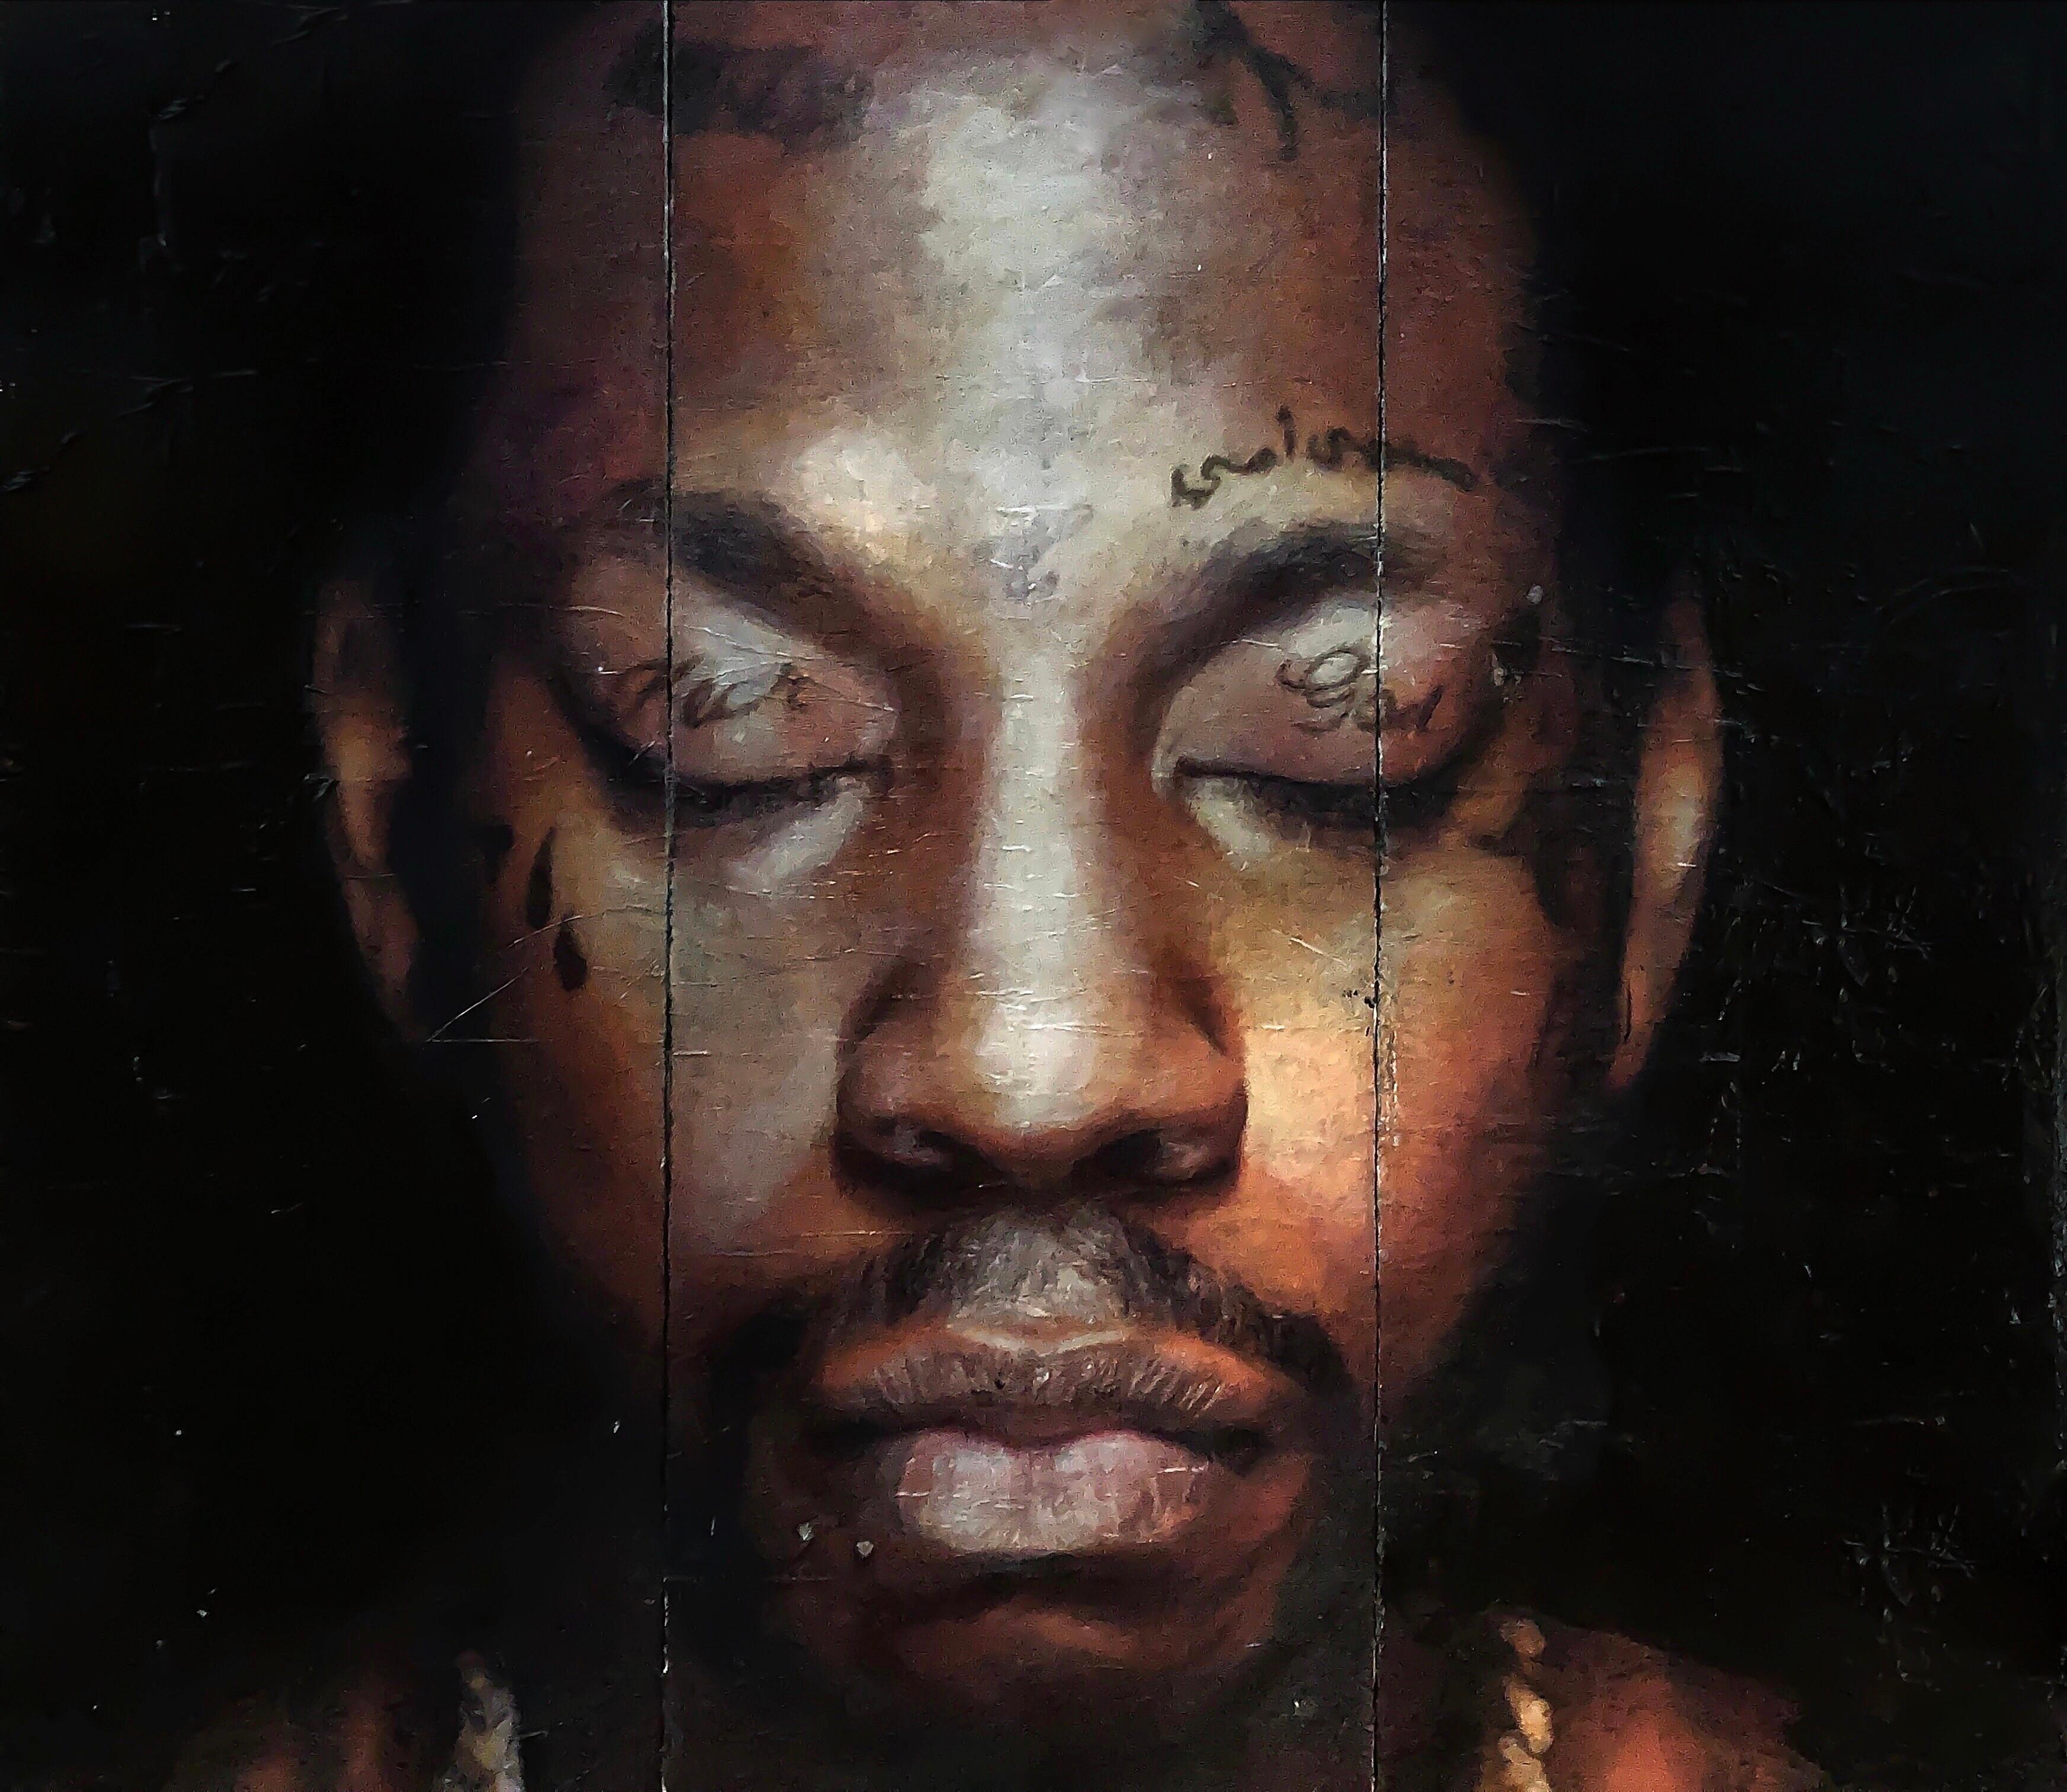 2 Chains, Lil Wayne Tattoos Album  - Painting by Lavely Miller-Kershman 